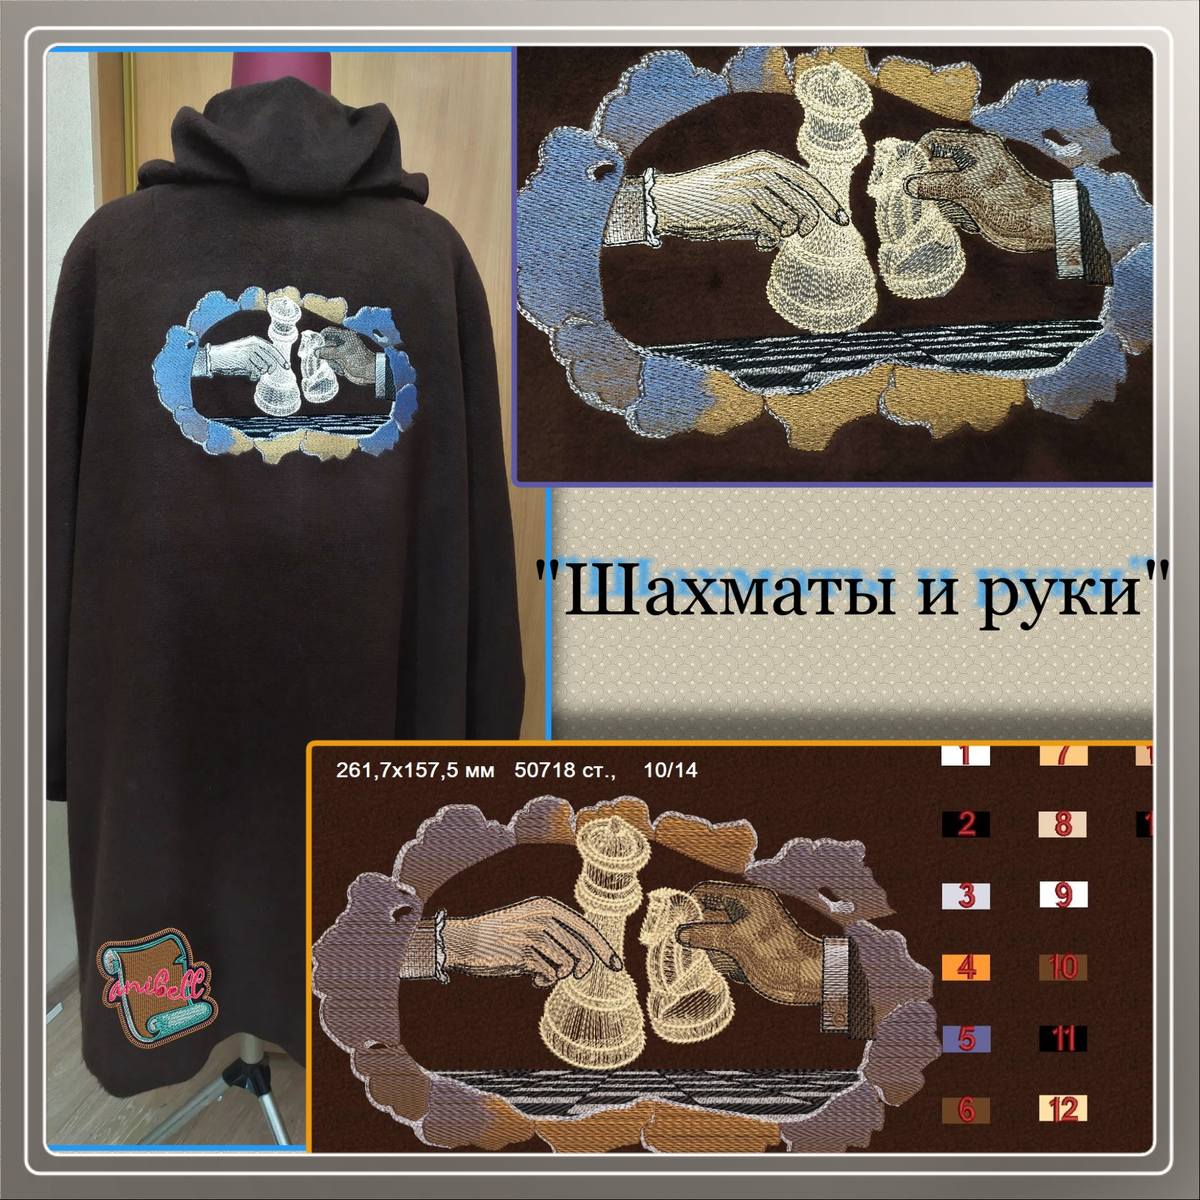 New Phototastic Collage anibell шахматы с руками